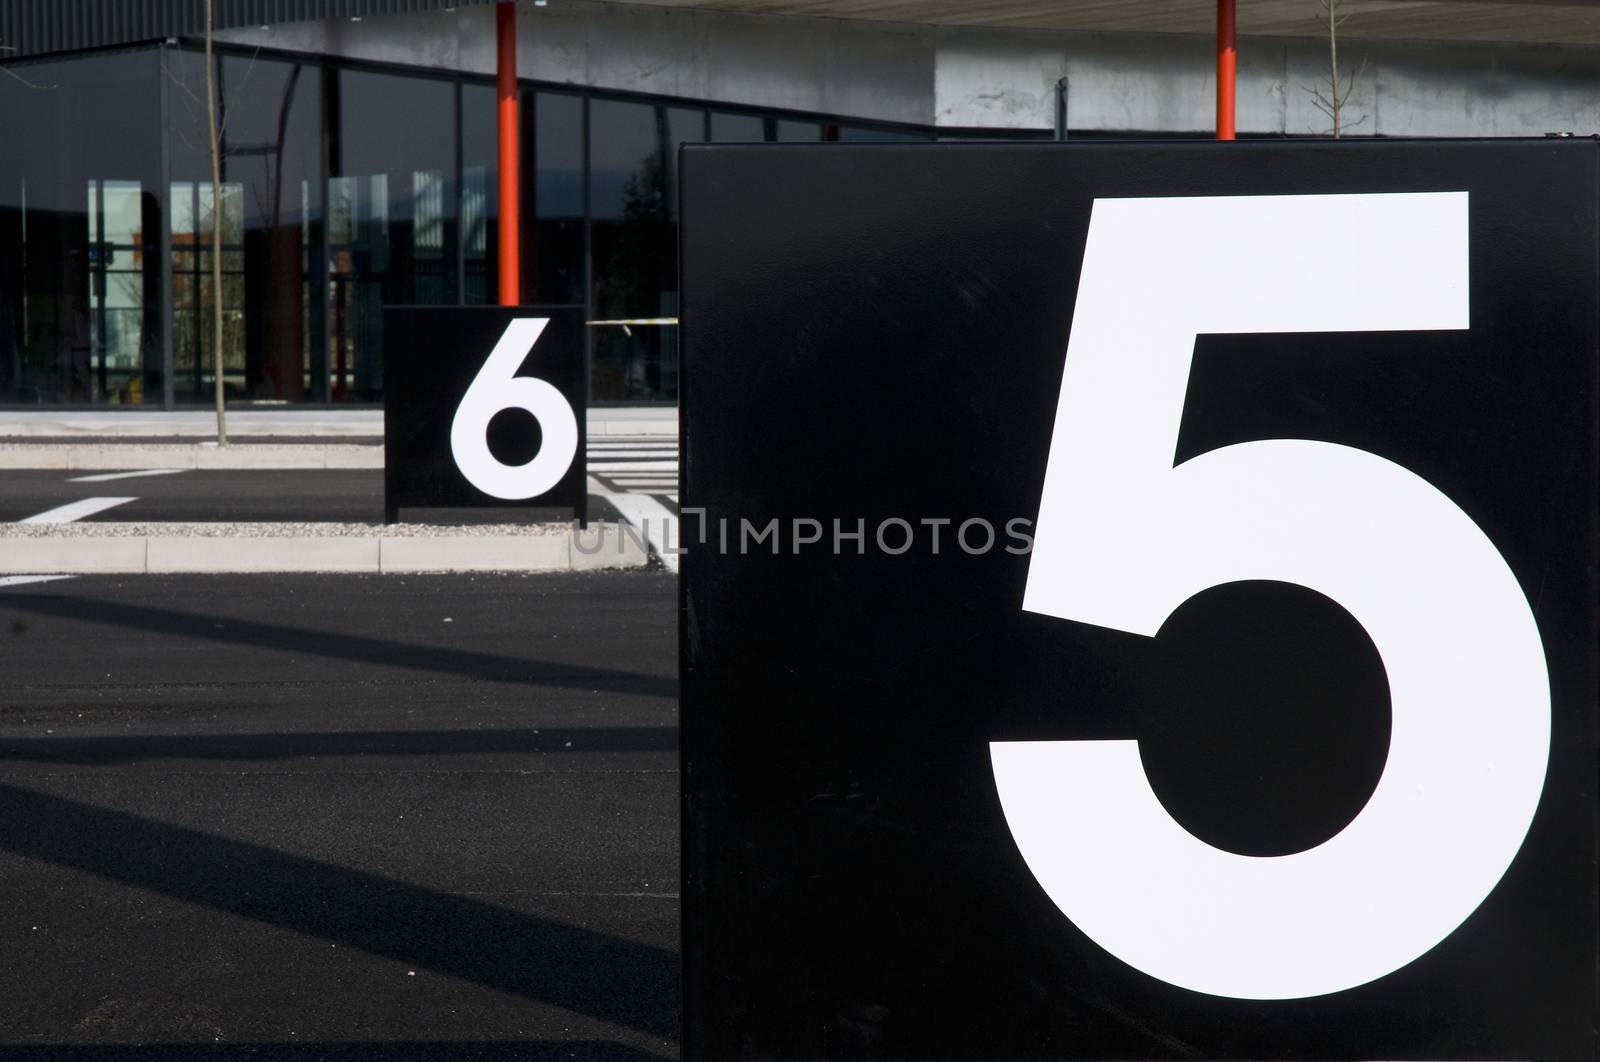 billboards with numbers in a parking lot